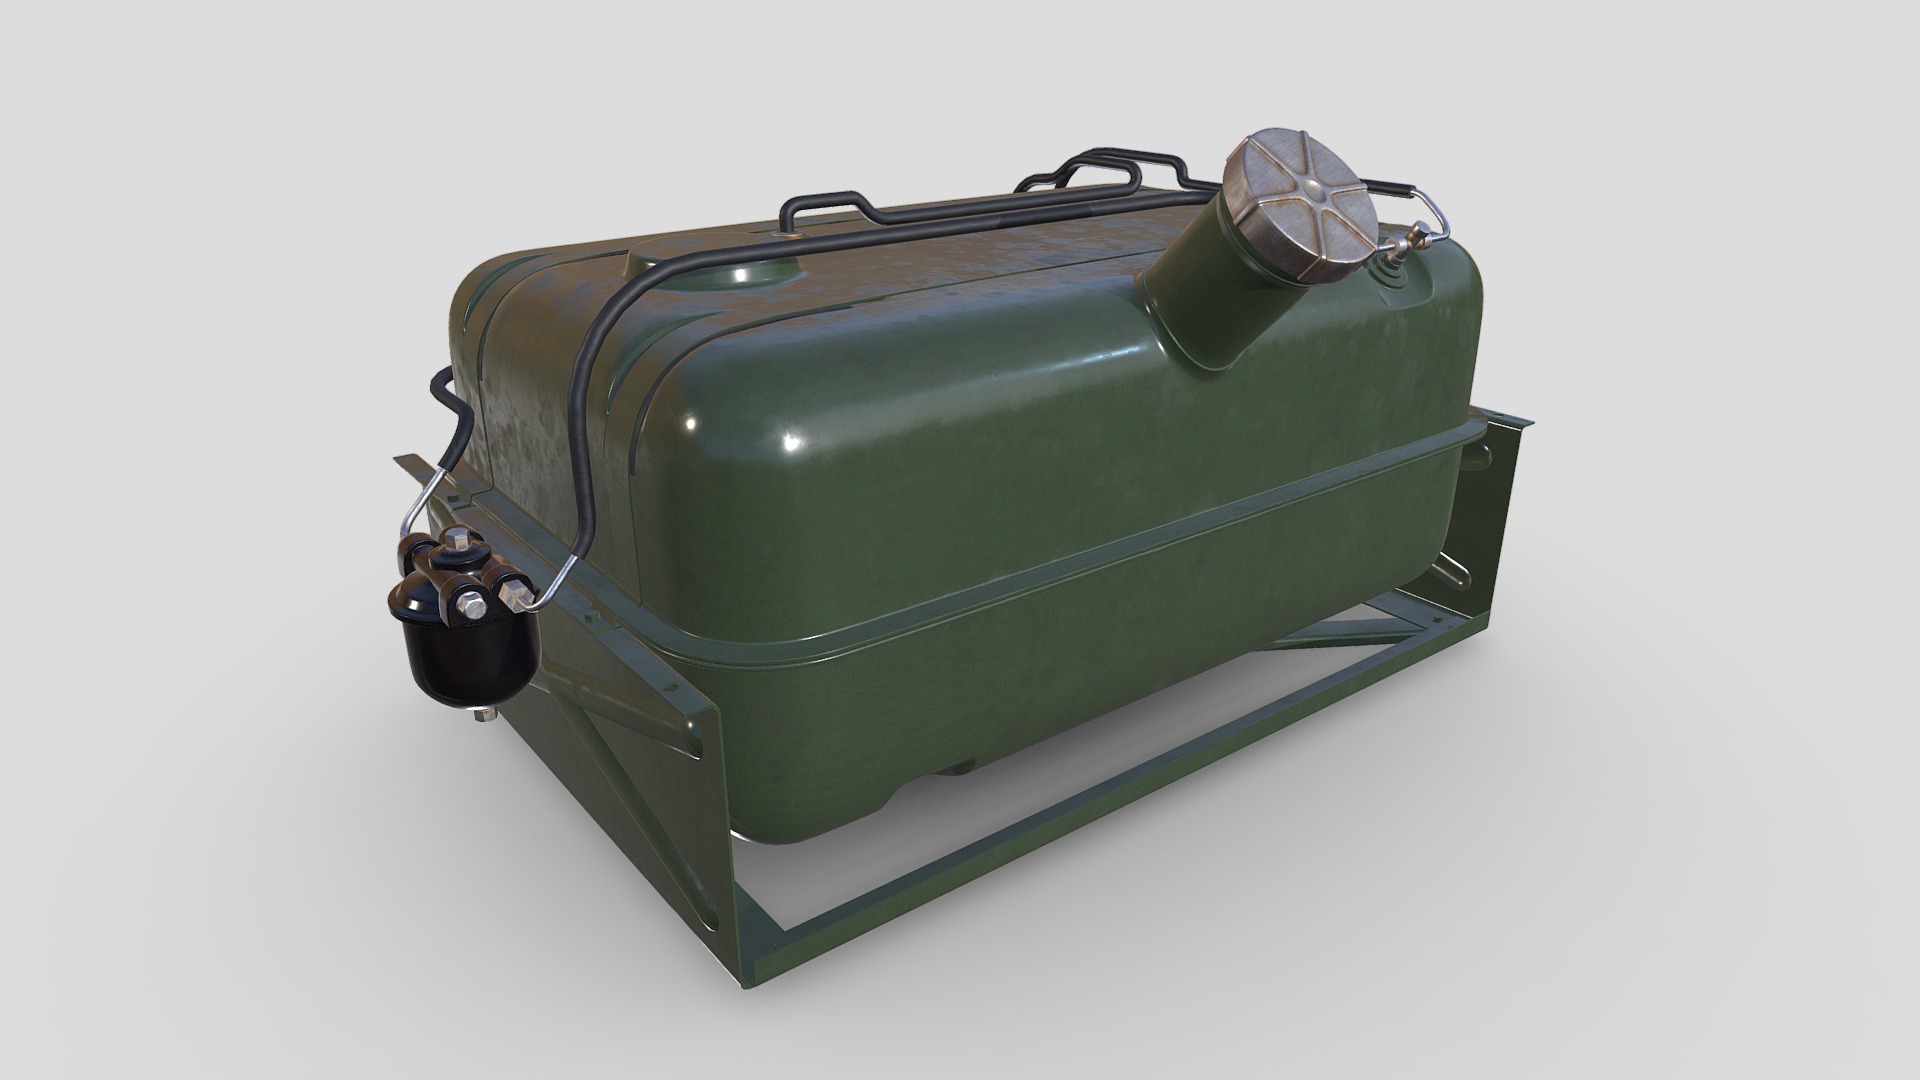 3D model ZIL-157 Fuel tank_New - This is a 3D model of the ZIL-157 Fuel tank_New. The 3D model is about a green suitcase with a handle.